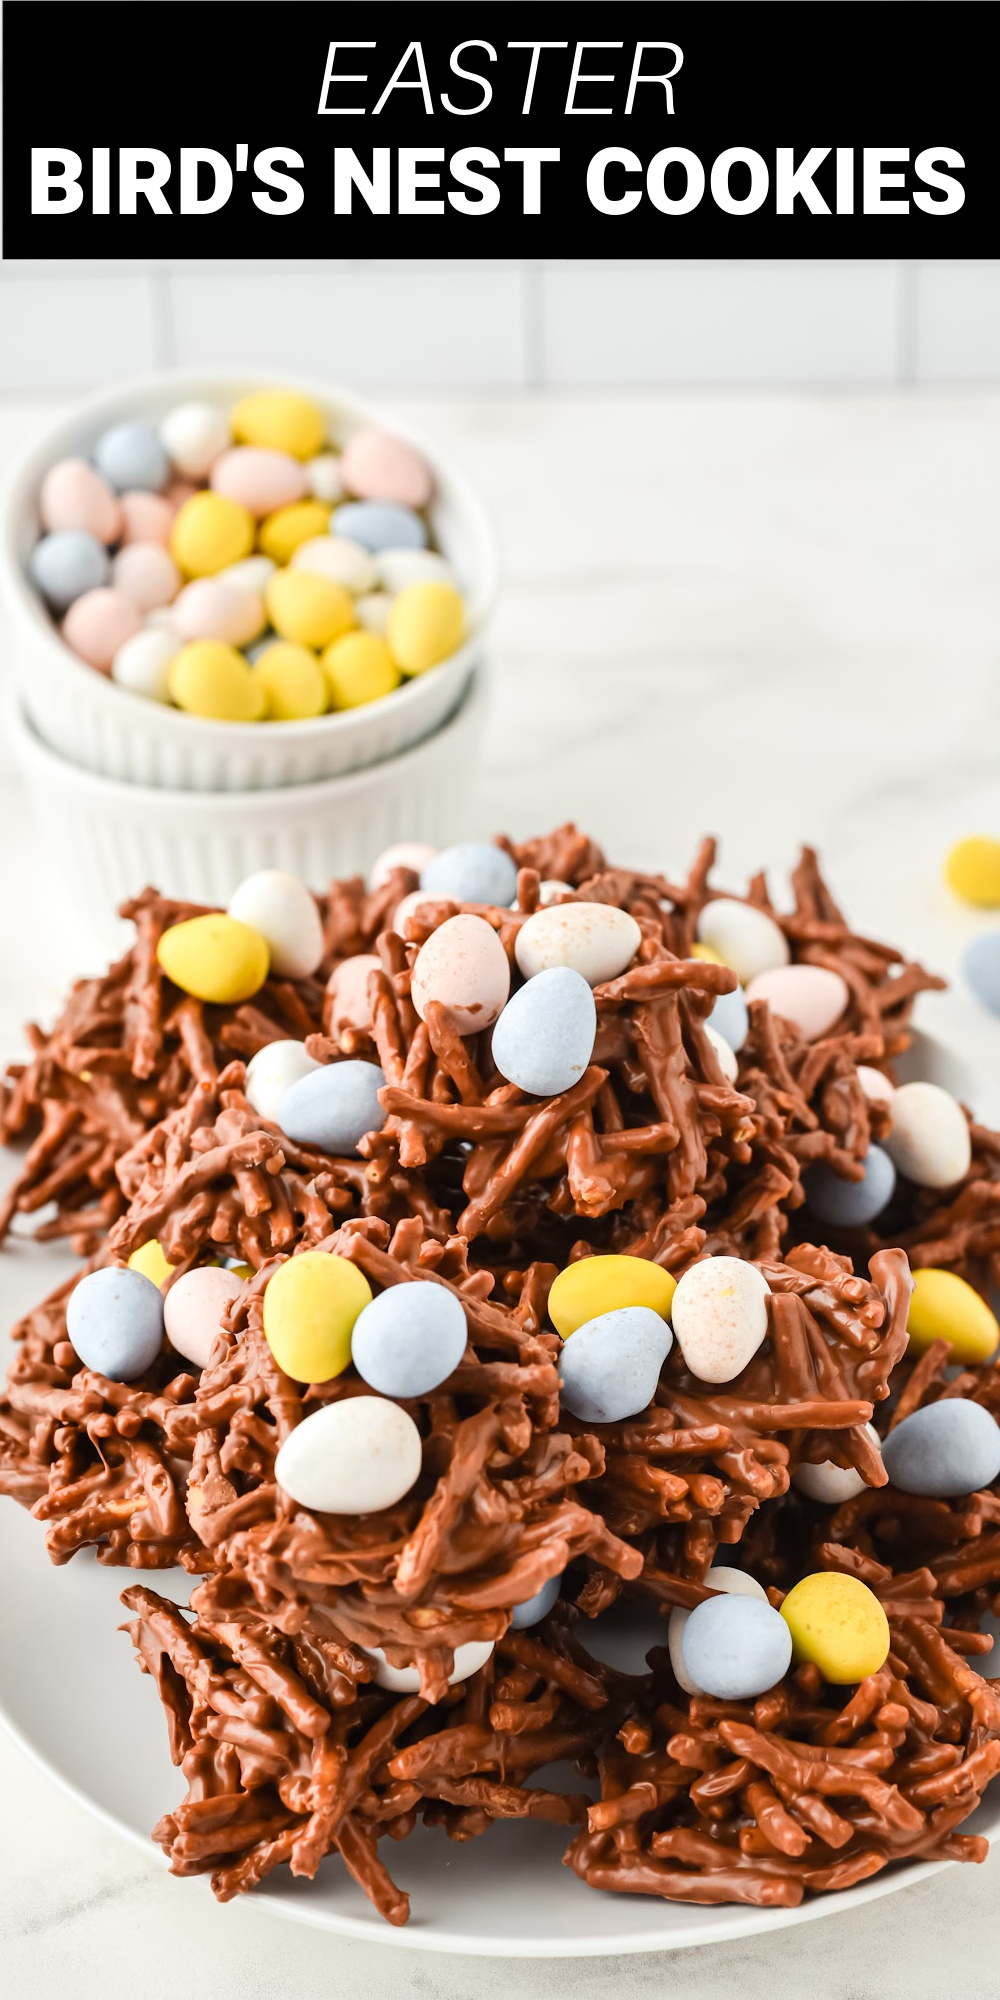 kids will love helping you make. Adorned with pretty pastel candy eggs that are nestled in sweet chocolate and butterscotch nests, these cookies will be a huge hit at your Easter dinner table! 